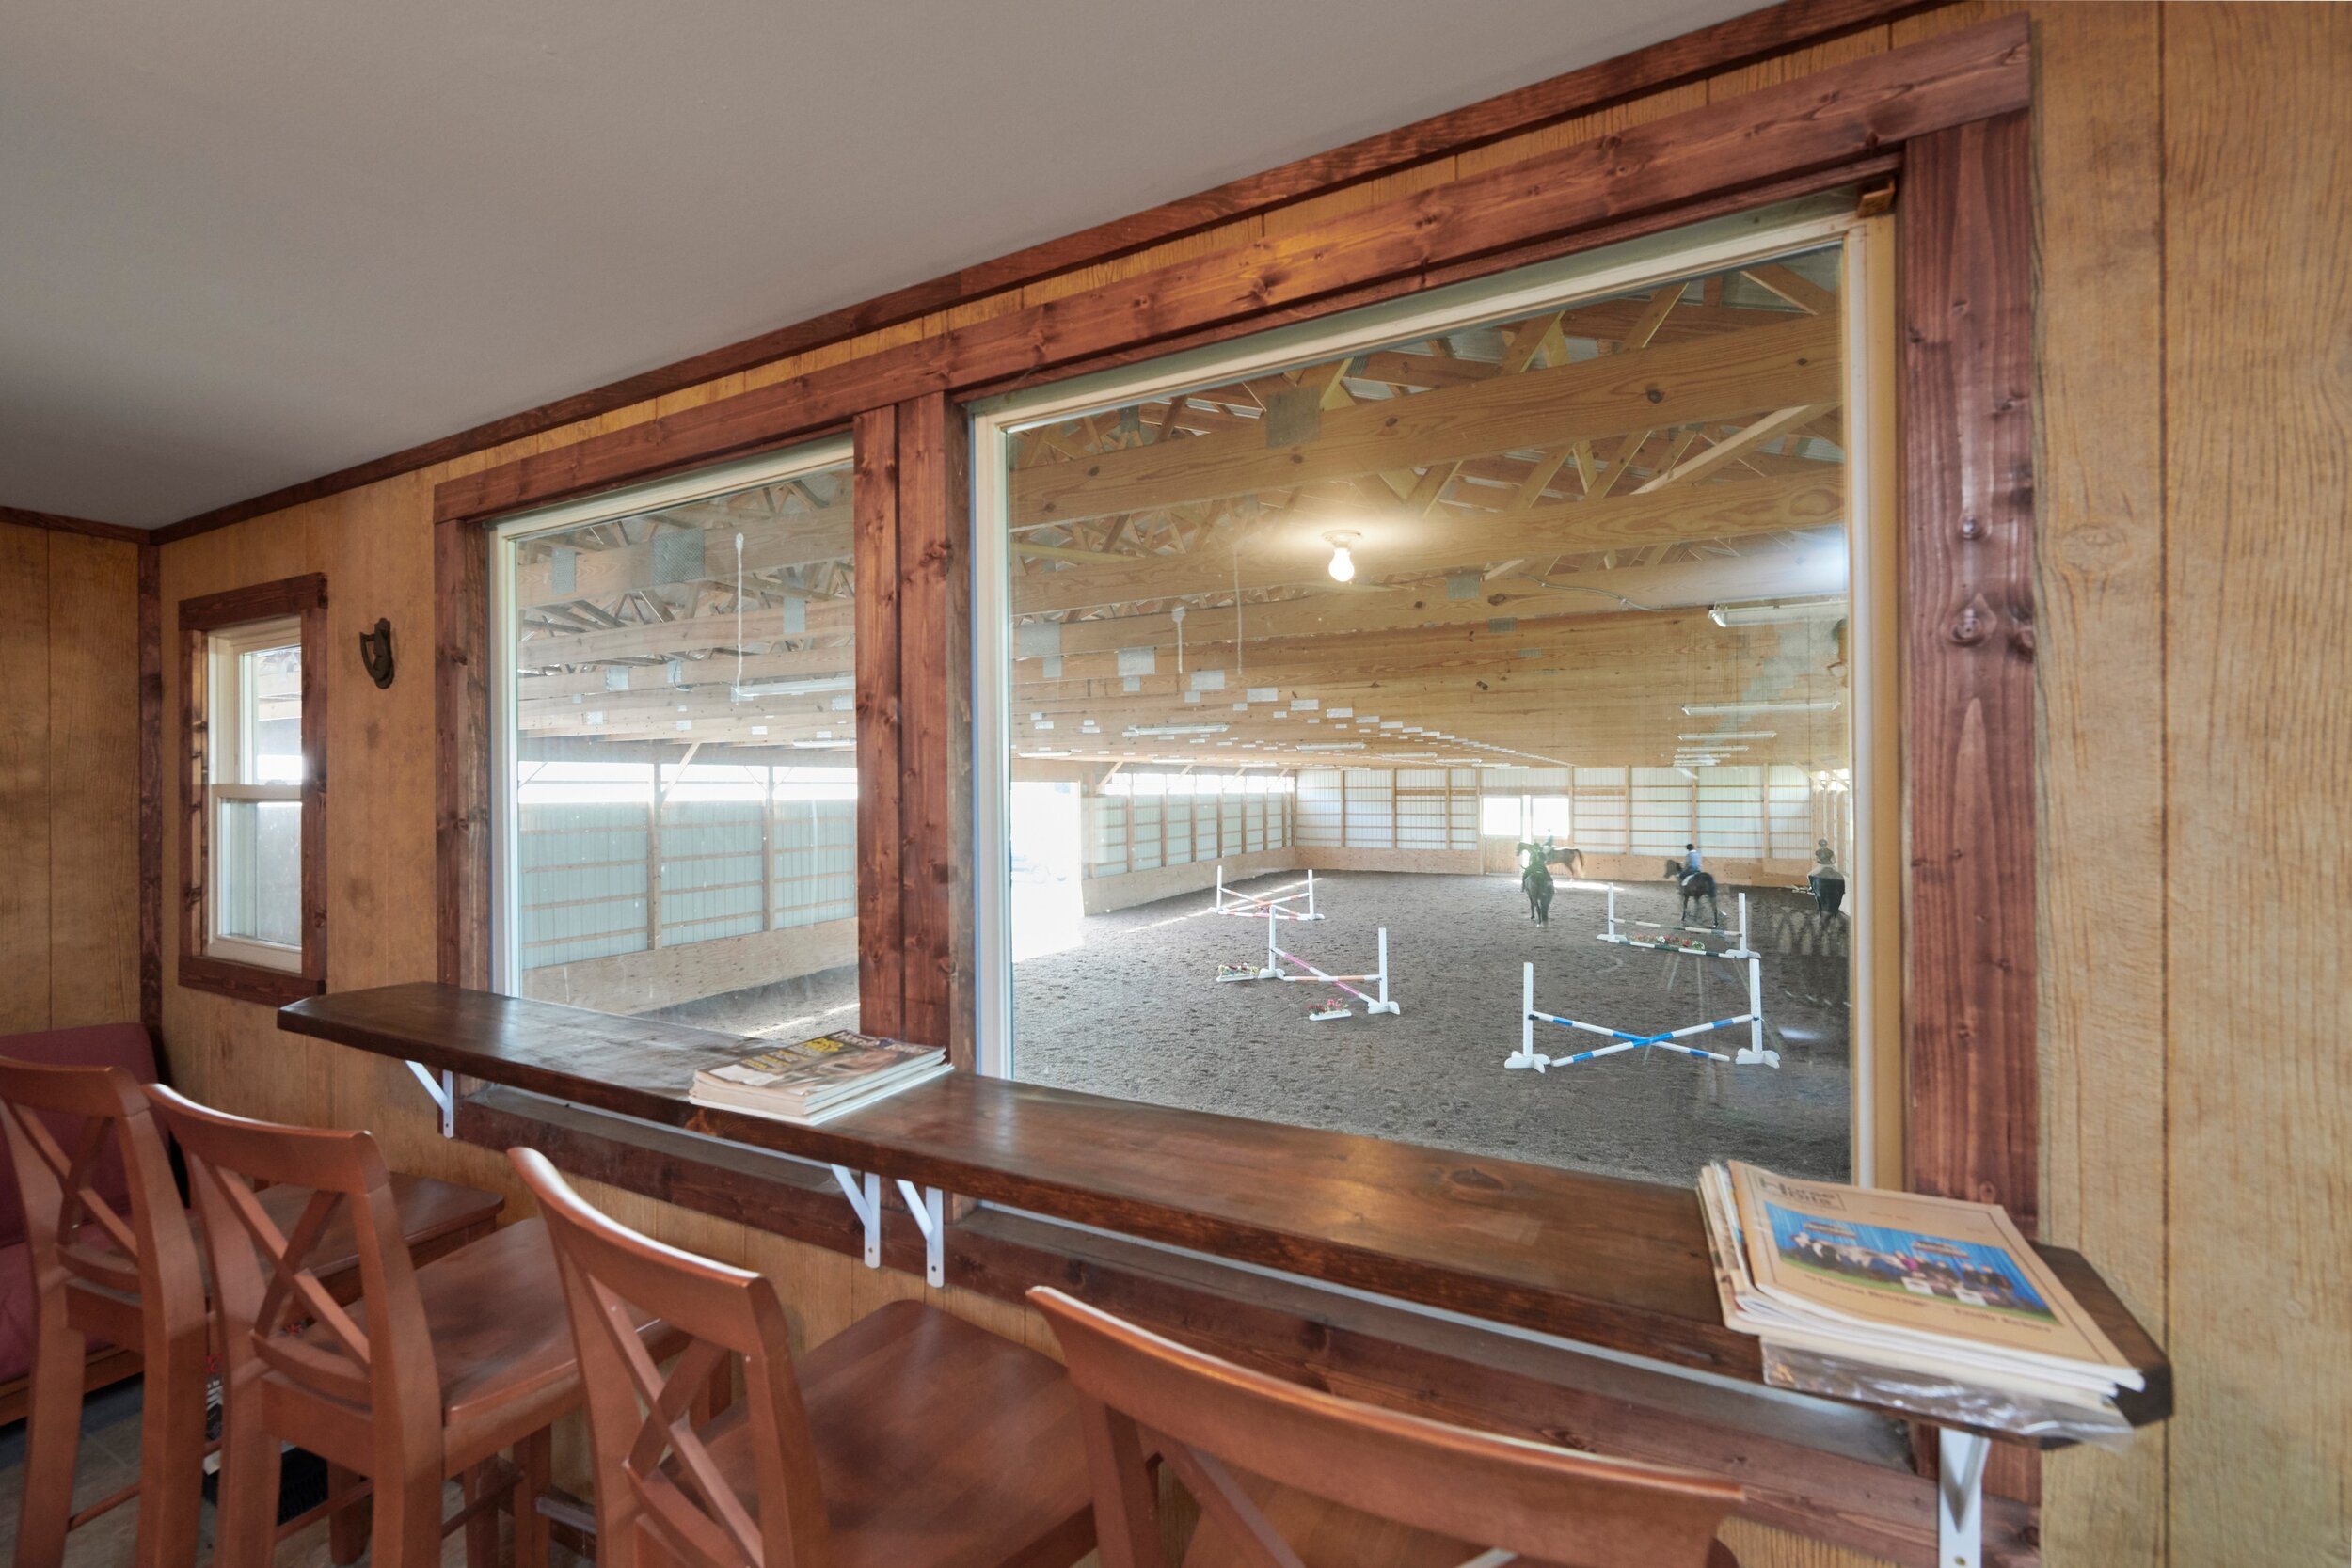 32 for sale 10050 Short Cut Rd, Weedsport, NY horse riding stables farm ranch equestrian property for .JPG